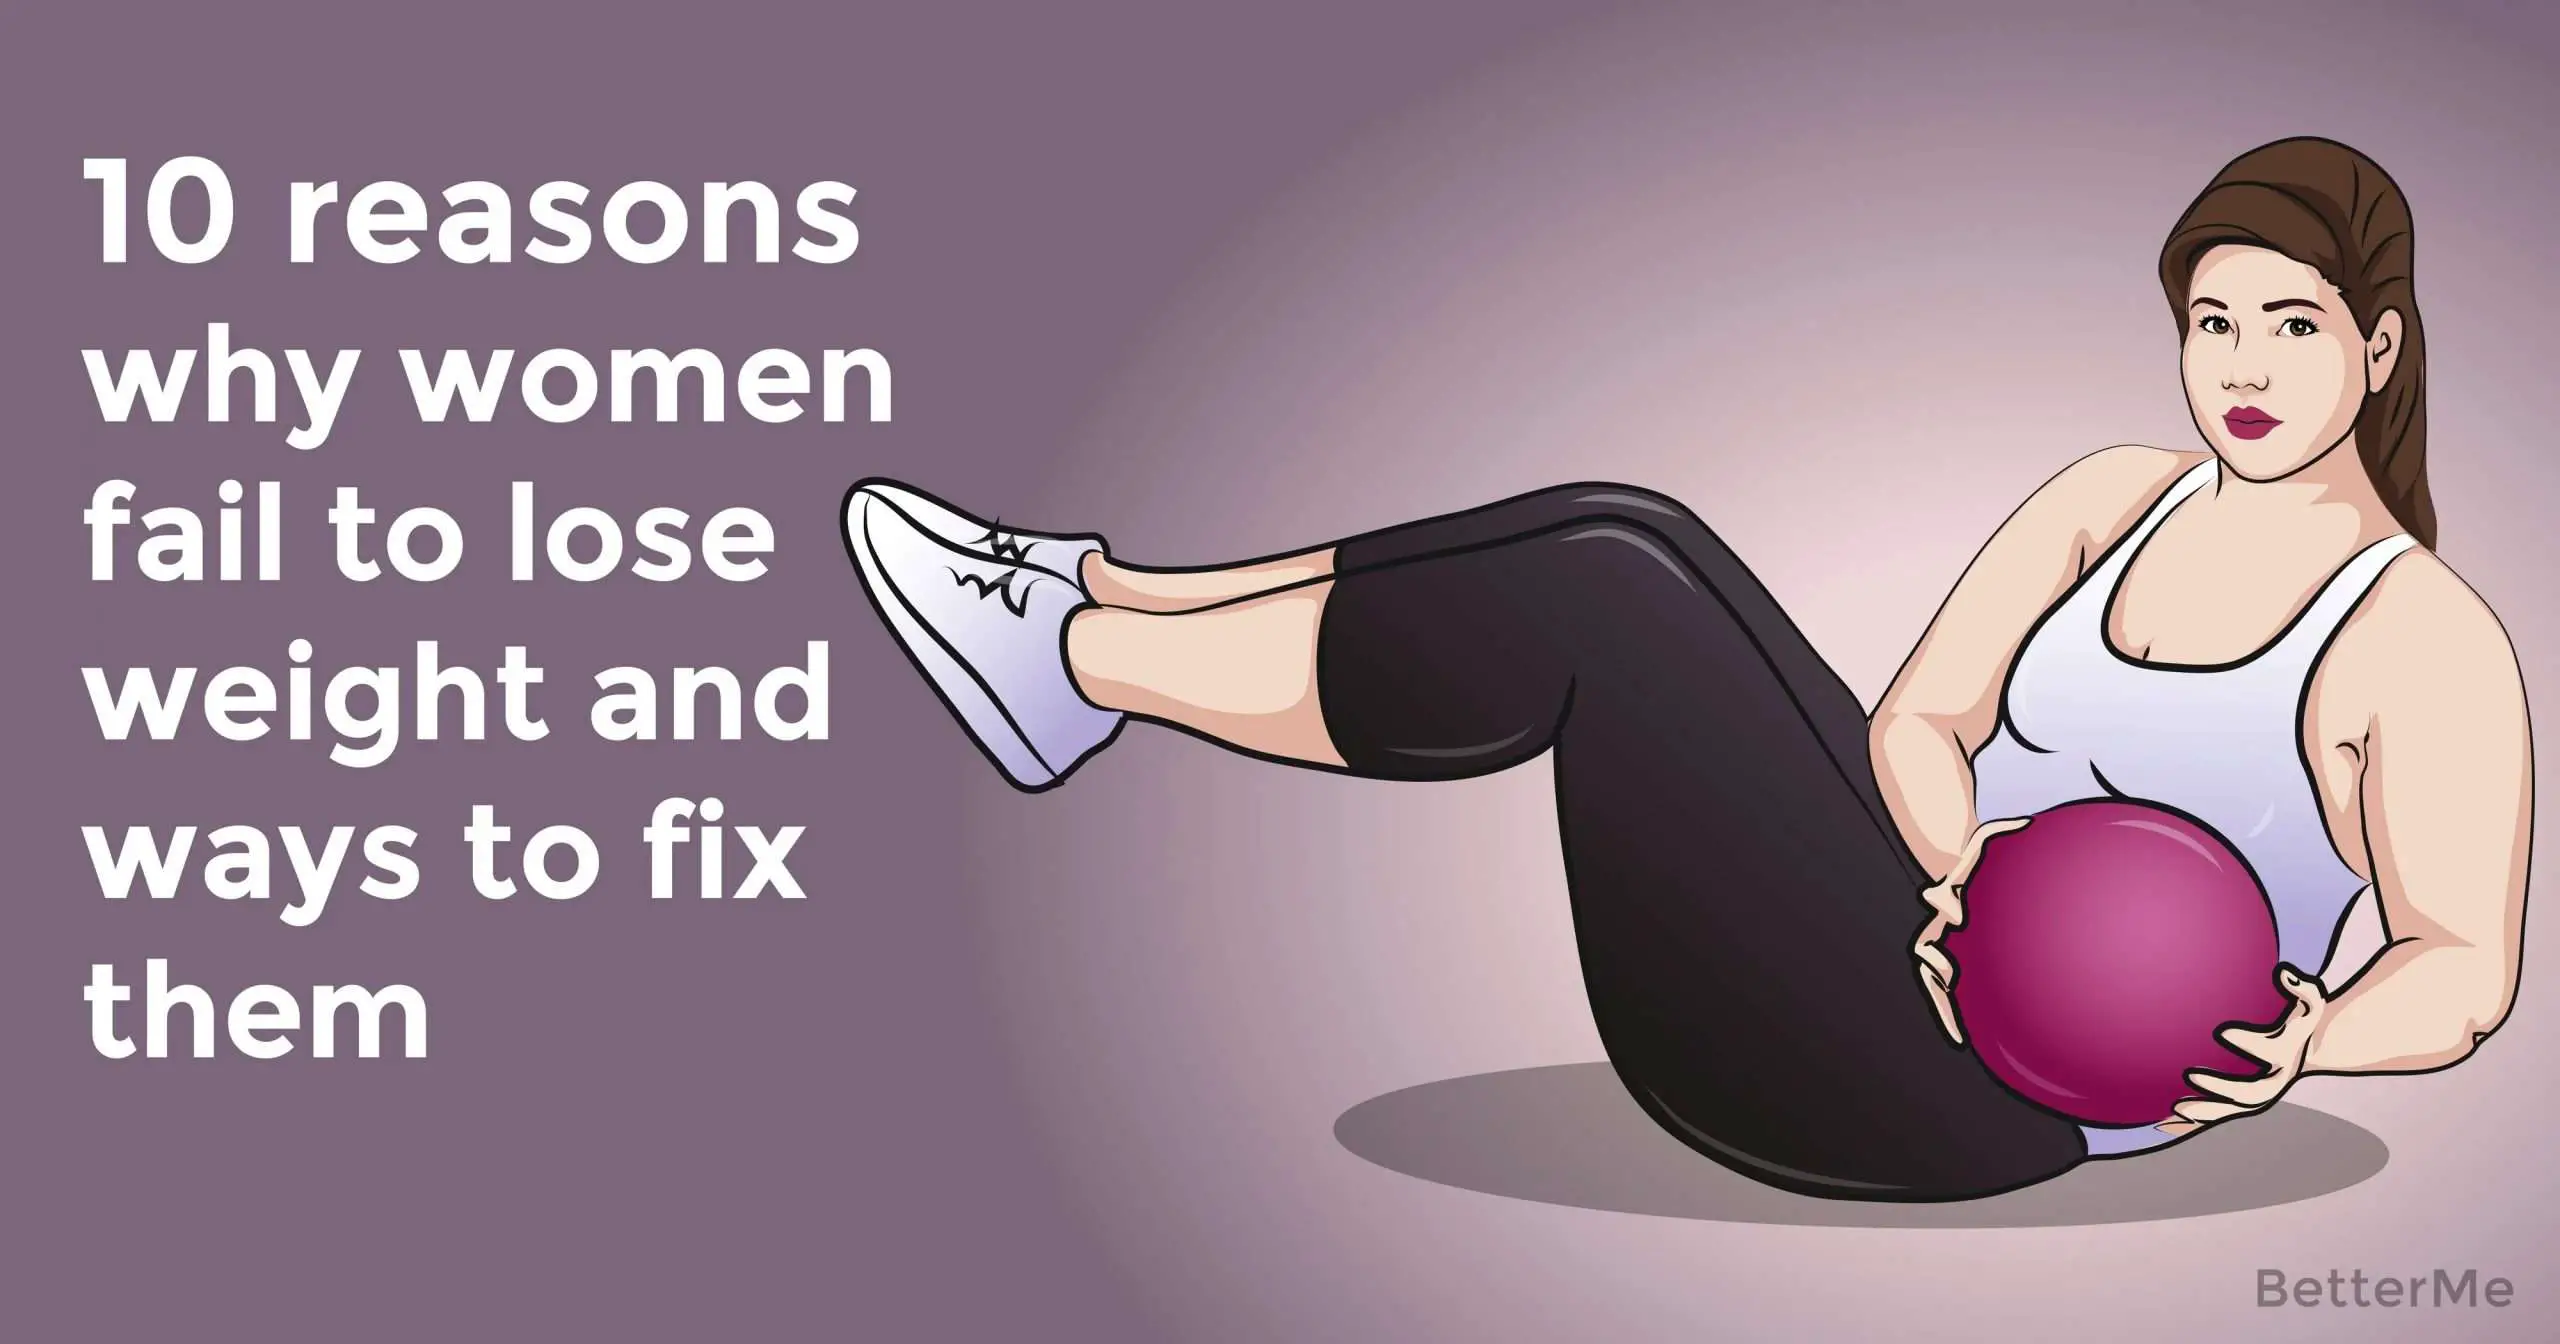 10 reasons why women fail to lose weight and ways to fix them